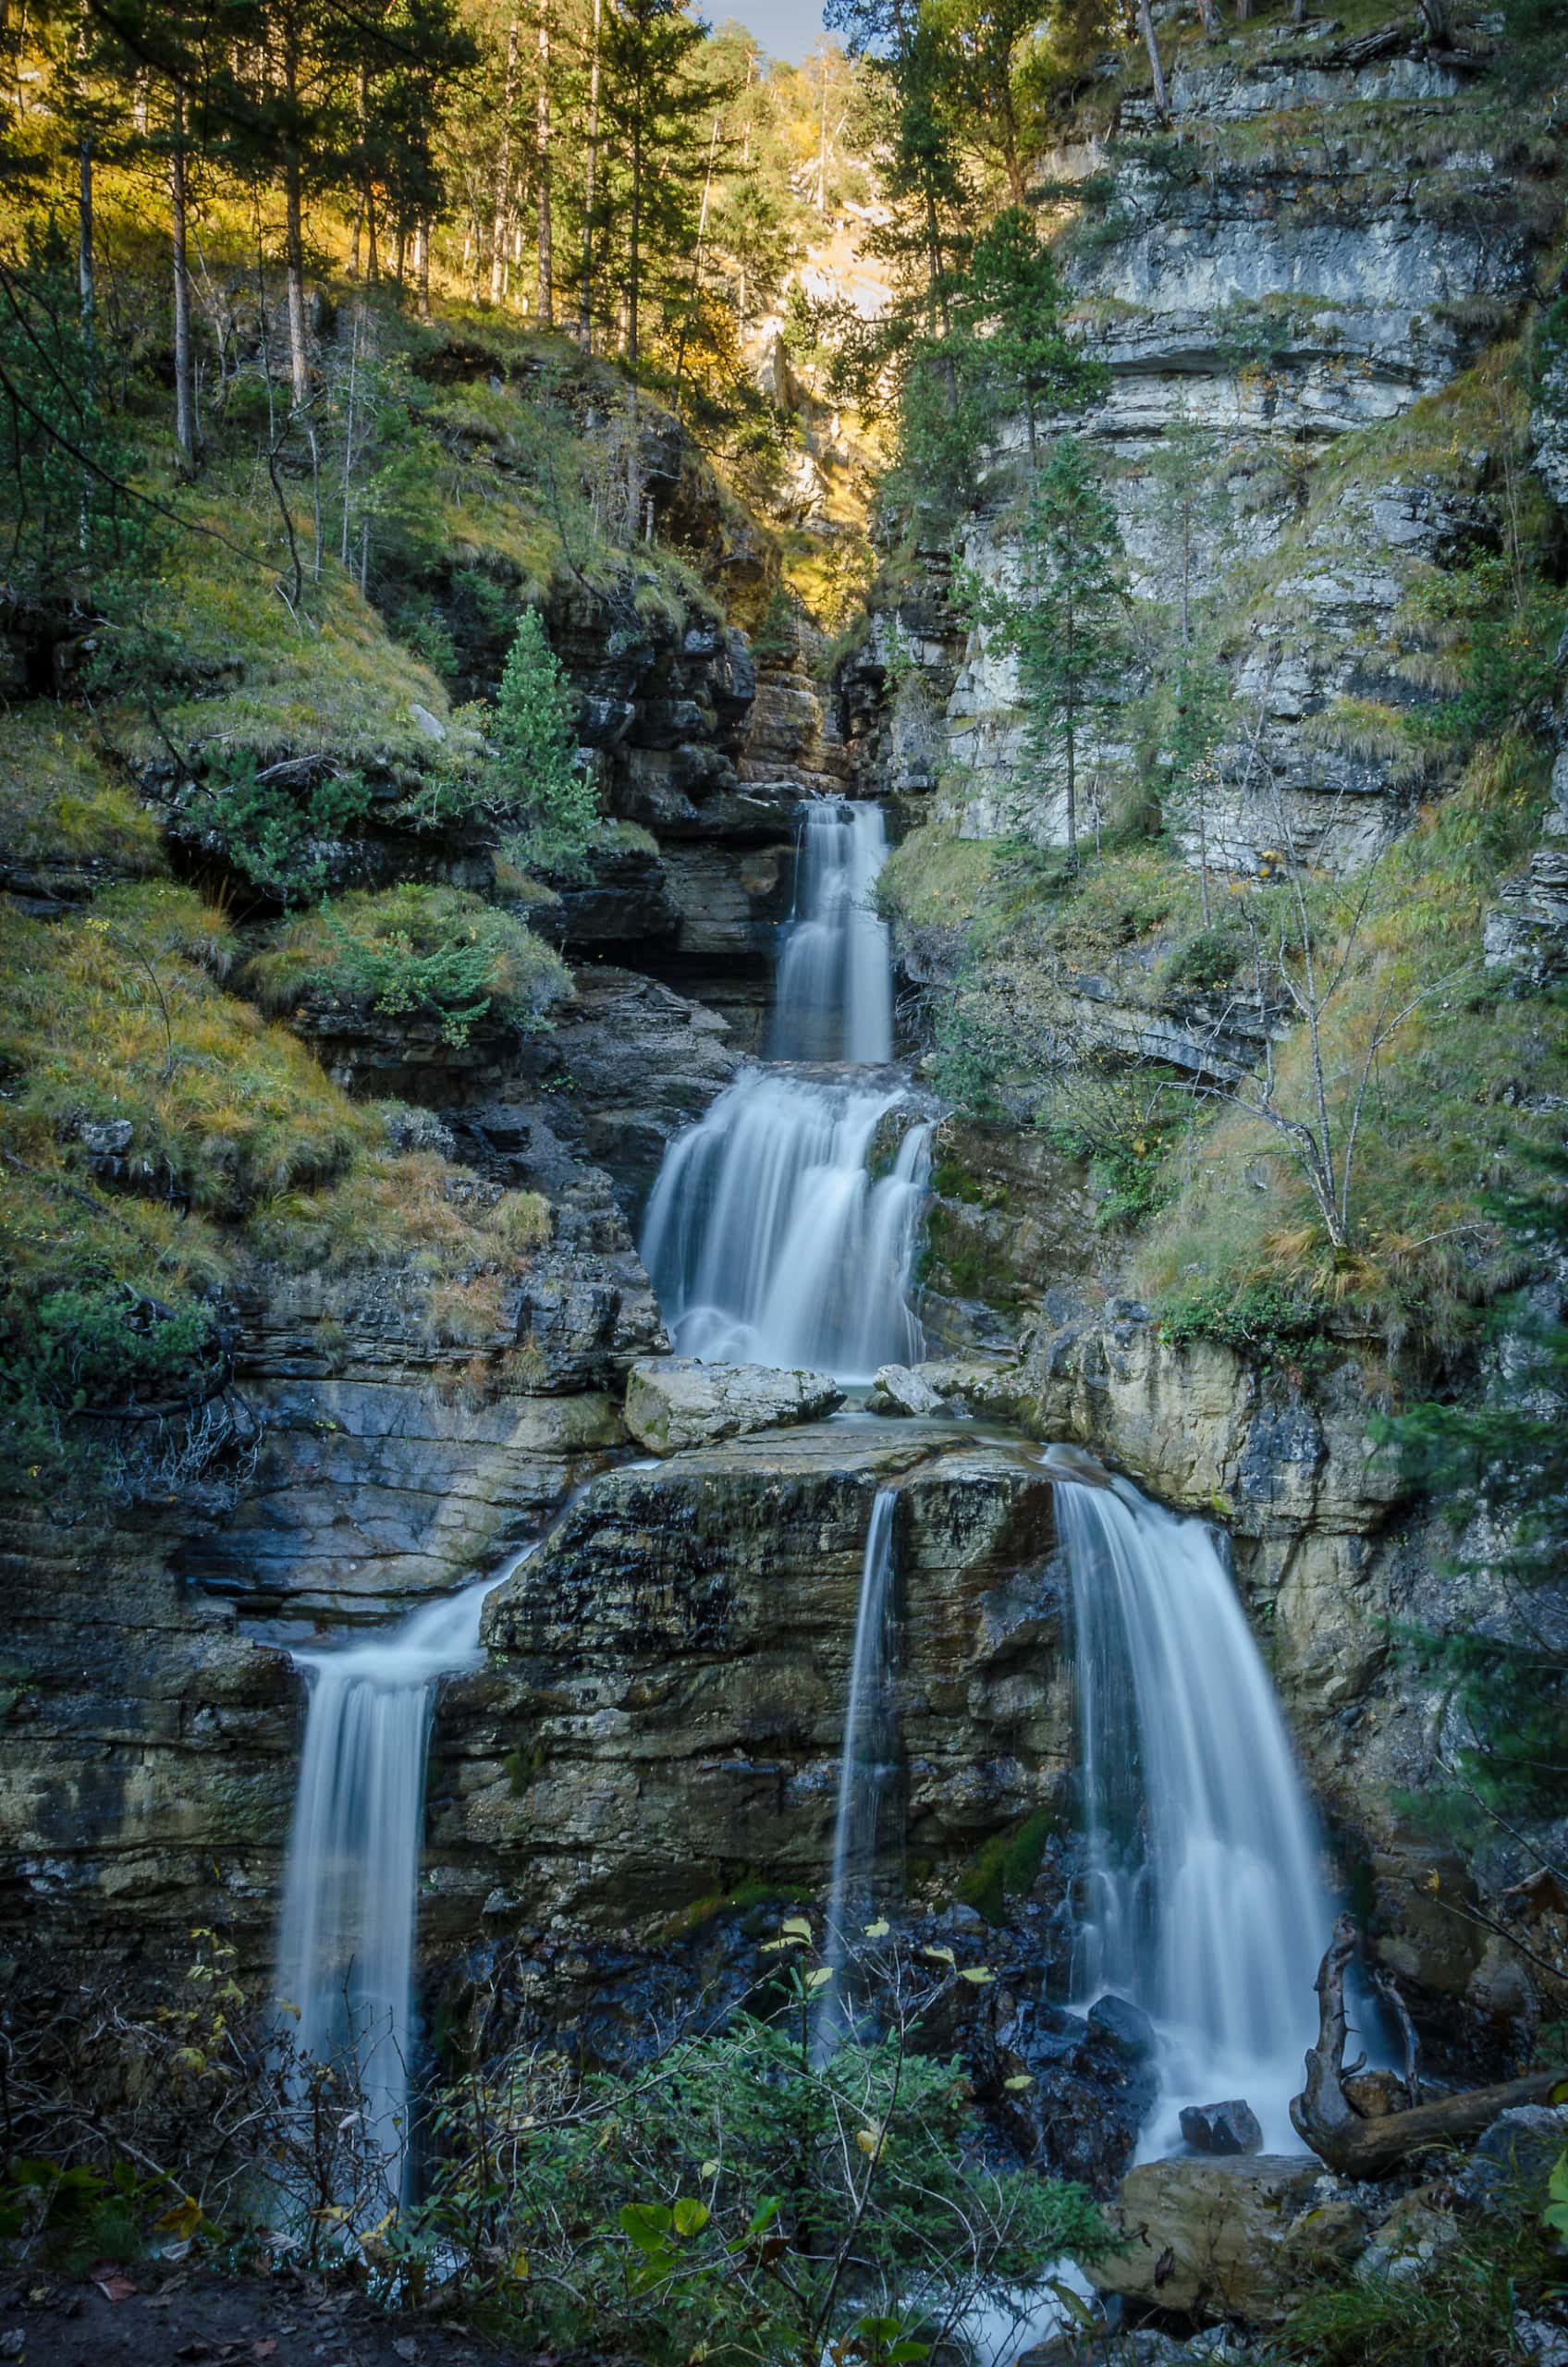 Kuhflucht Waterfalls on a hike in the Zugspitz region